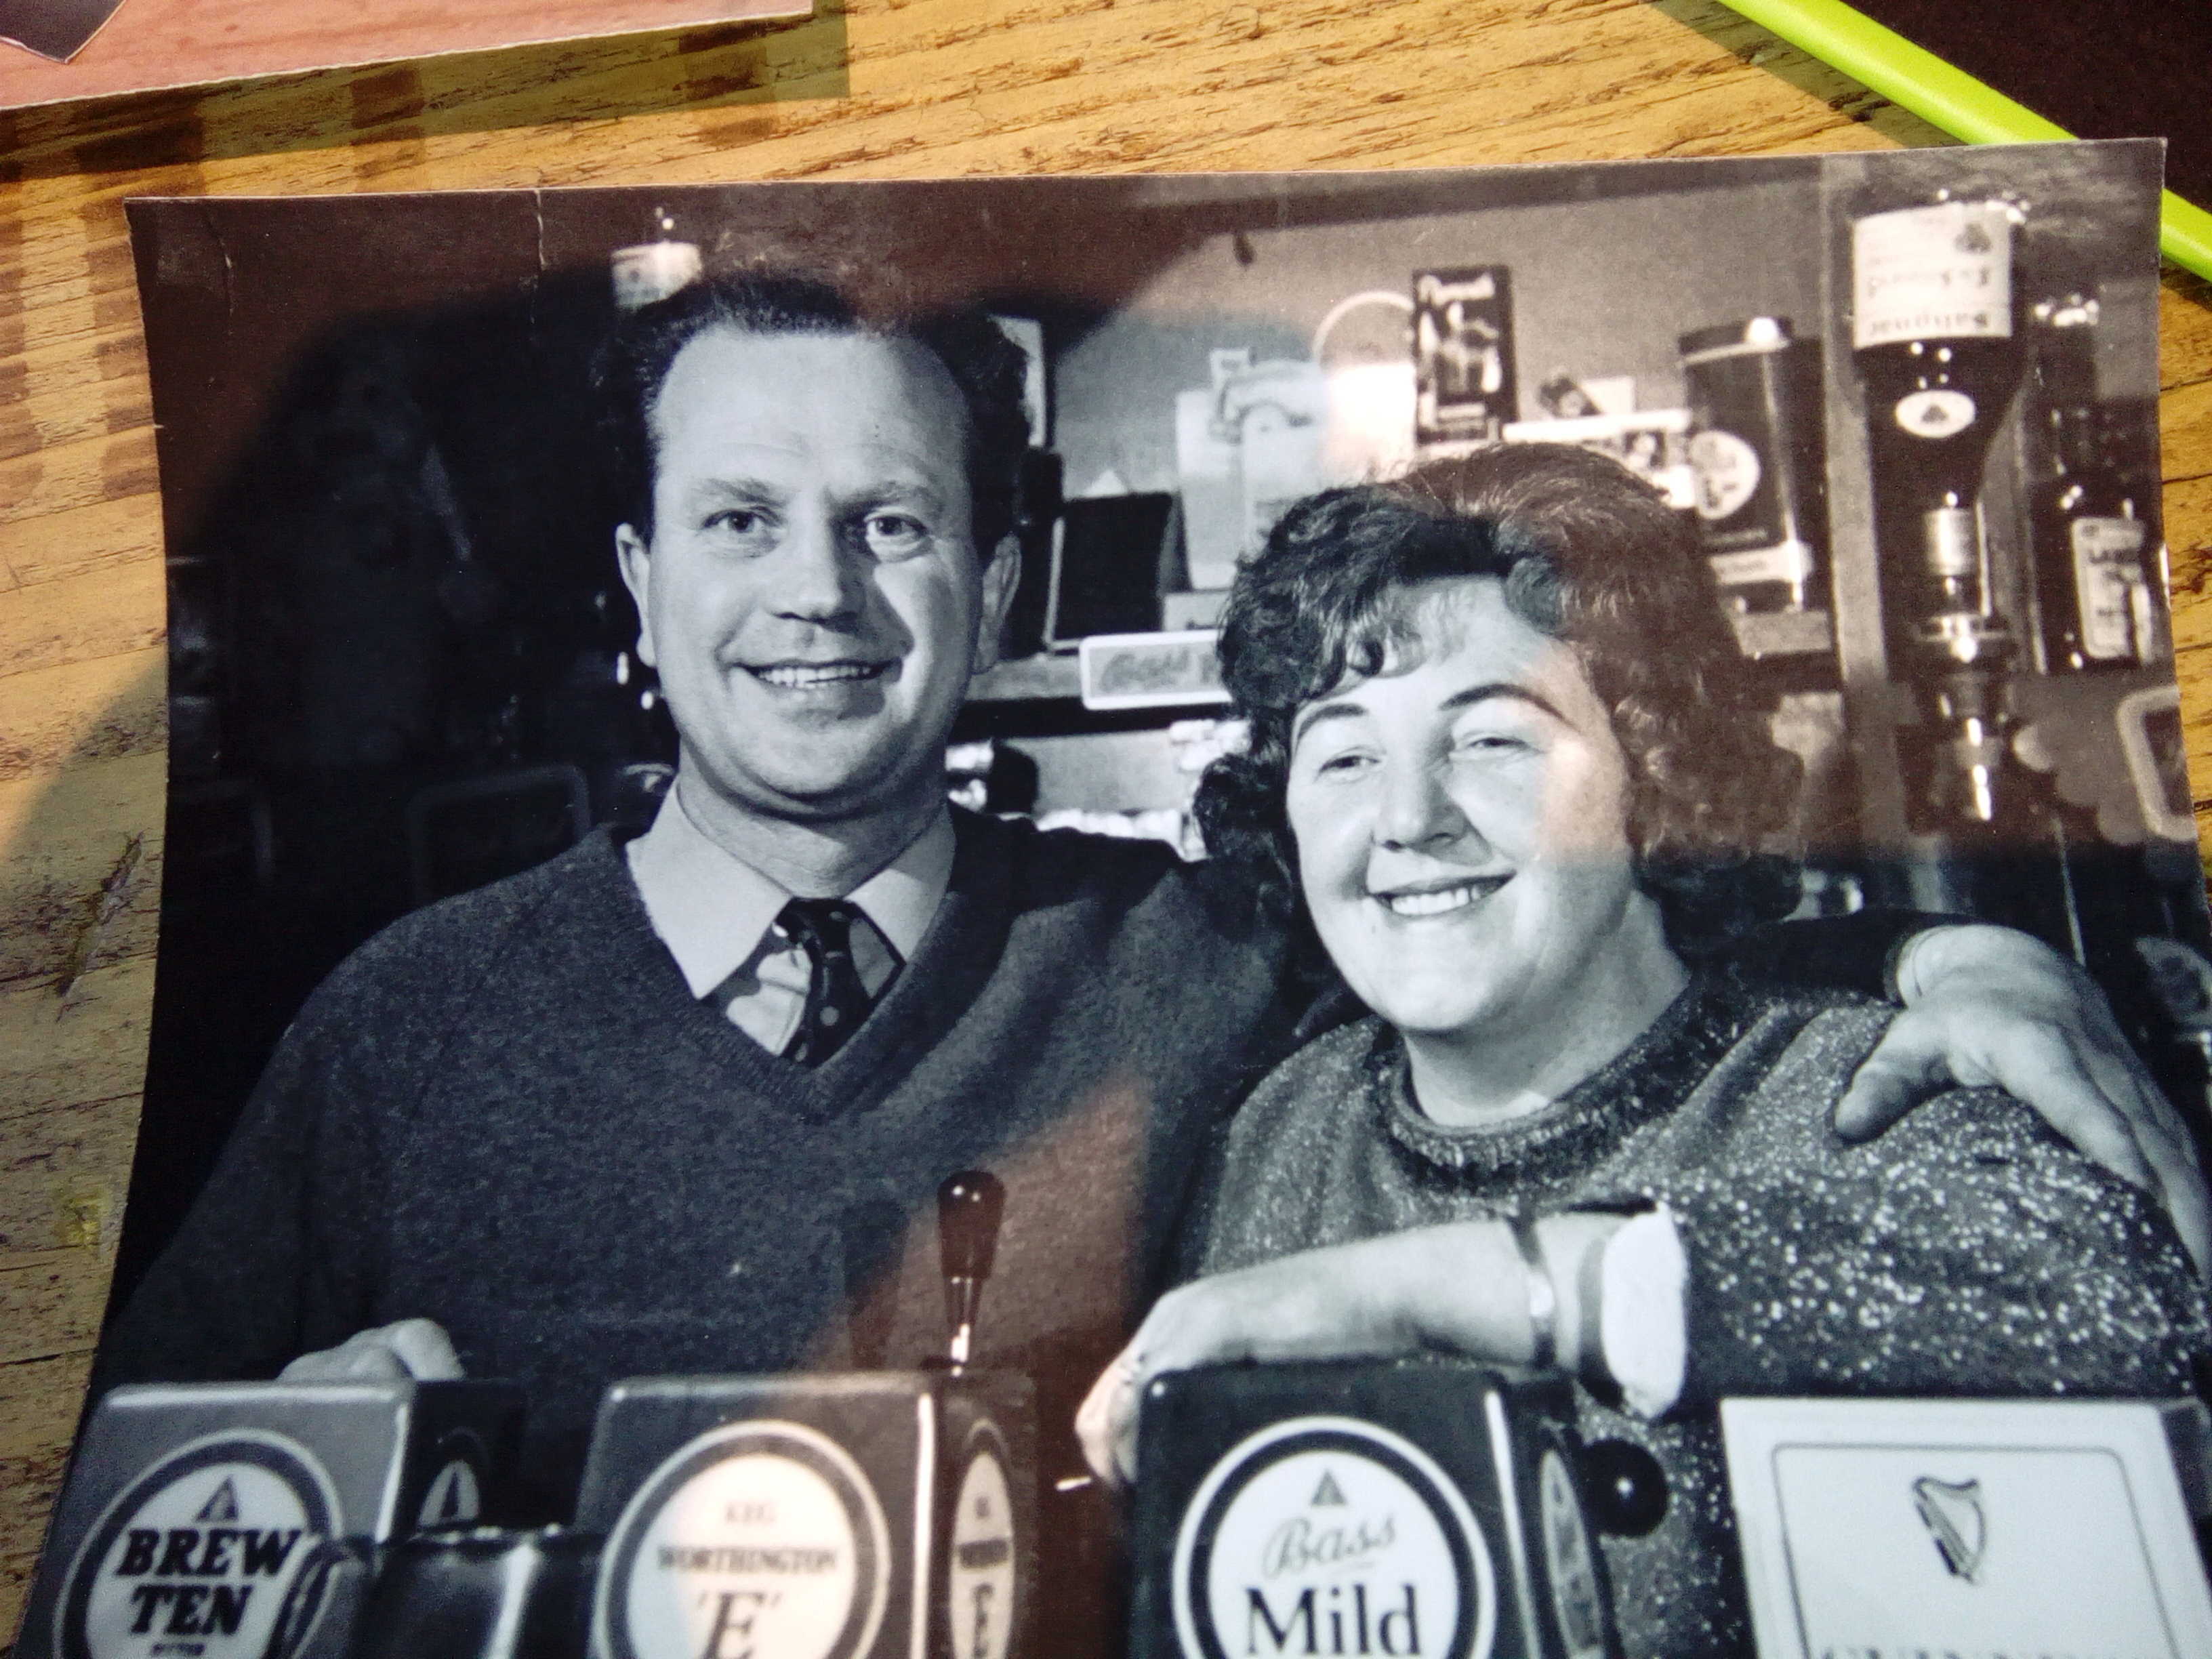 Above: Dennis and Peggie Bramley who ran The Moon from 1965 to 1982.